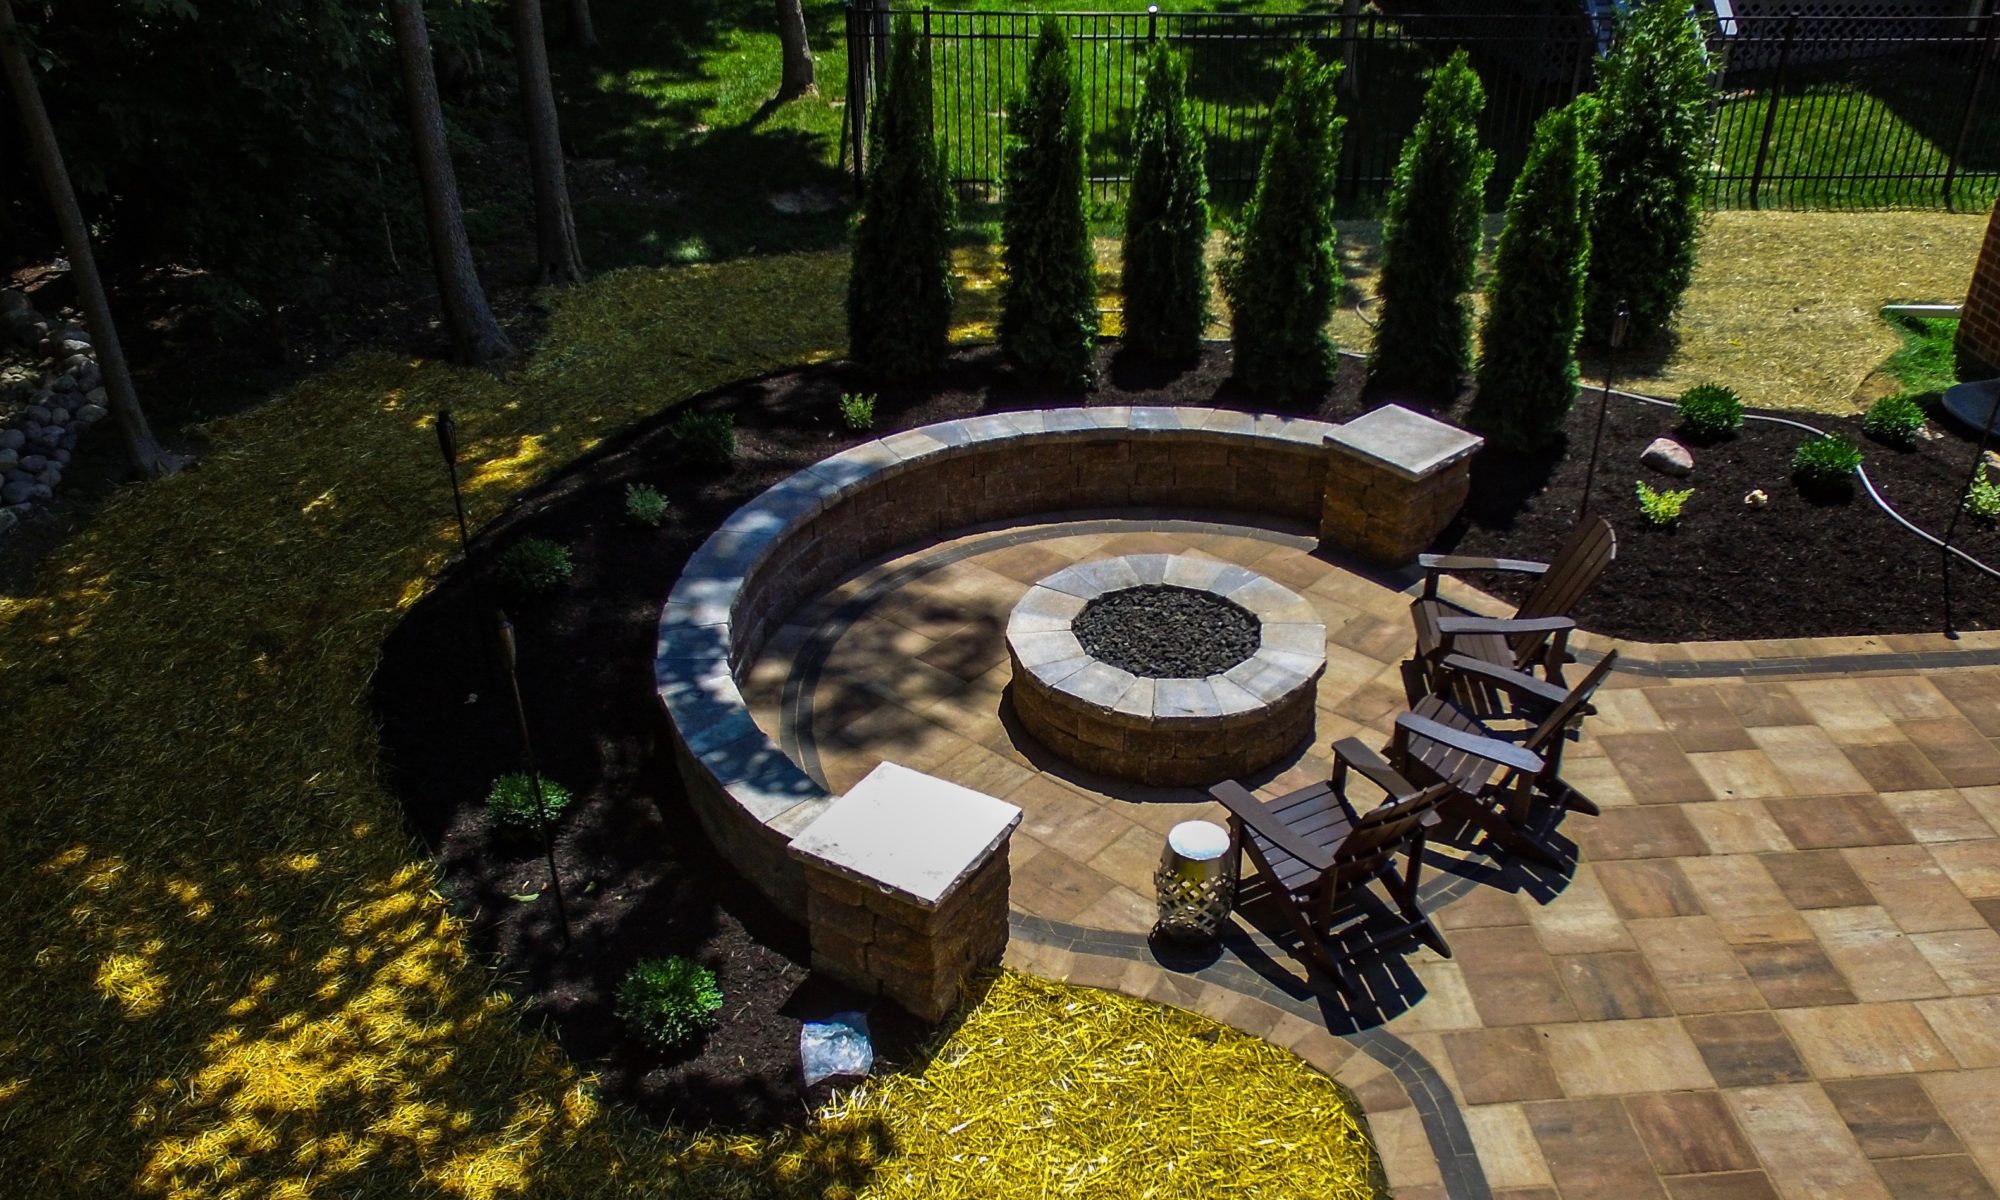 Precision Outdoors Fire Pit Indianapolis Indiana Exterior Design Outdoor Living Unilock Firepit fire pit belgard lafitt rustic slab paver patio beige and Ashbury haze color ways charcoal moduline accents custom gas fire pit wrap around seating wall Greenwood indiana